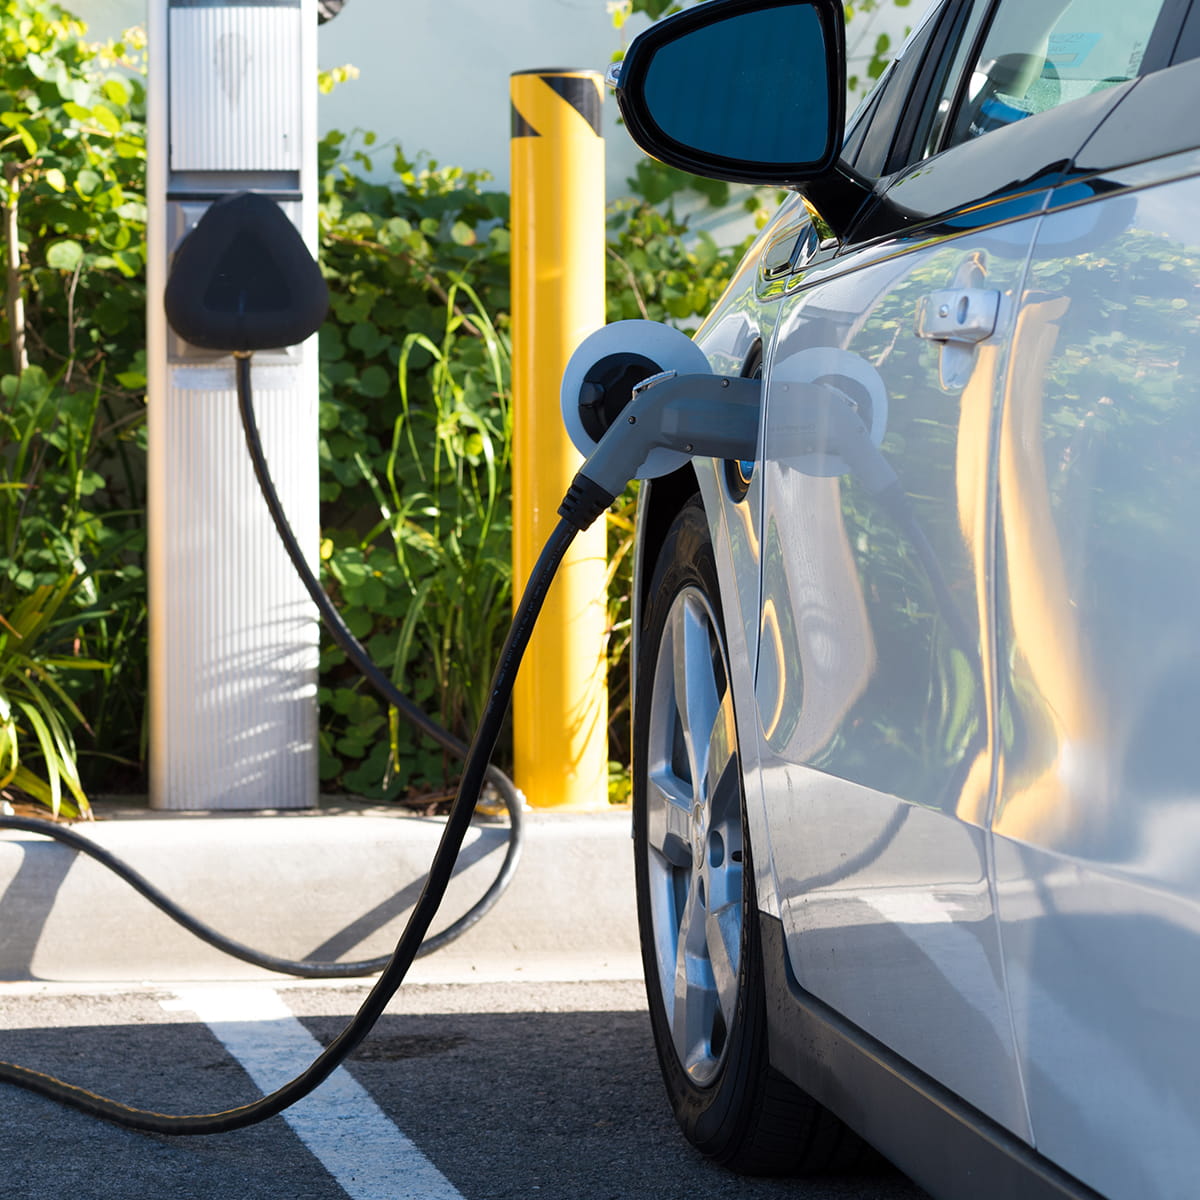 Electric Vehicles and the key risks surrounding batteries